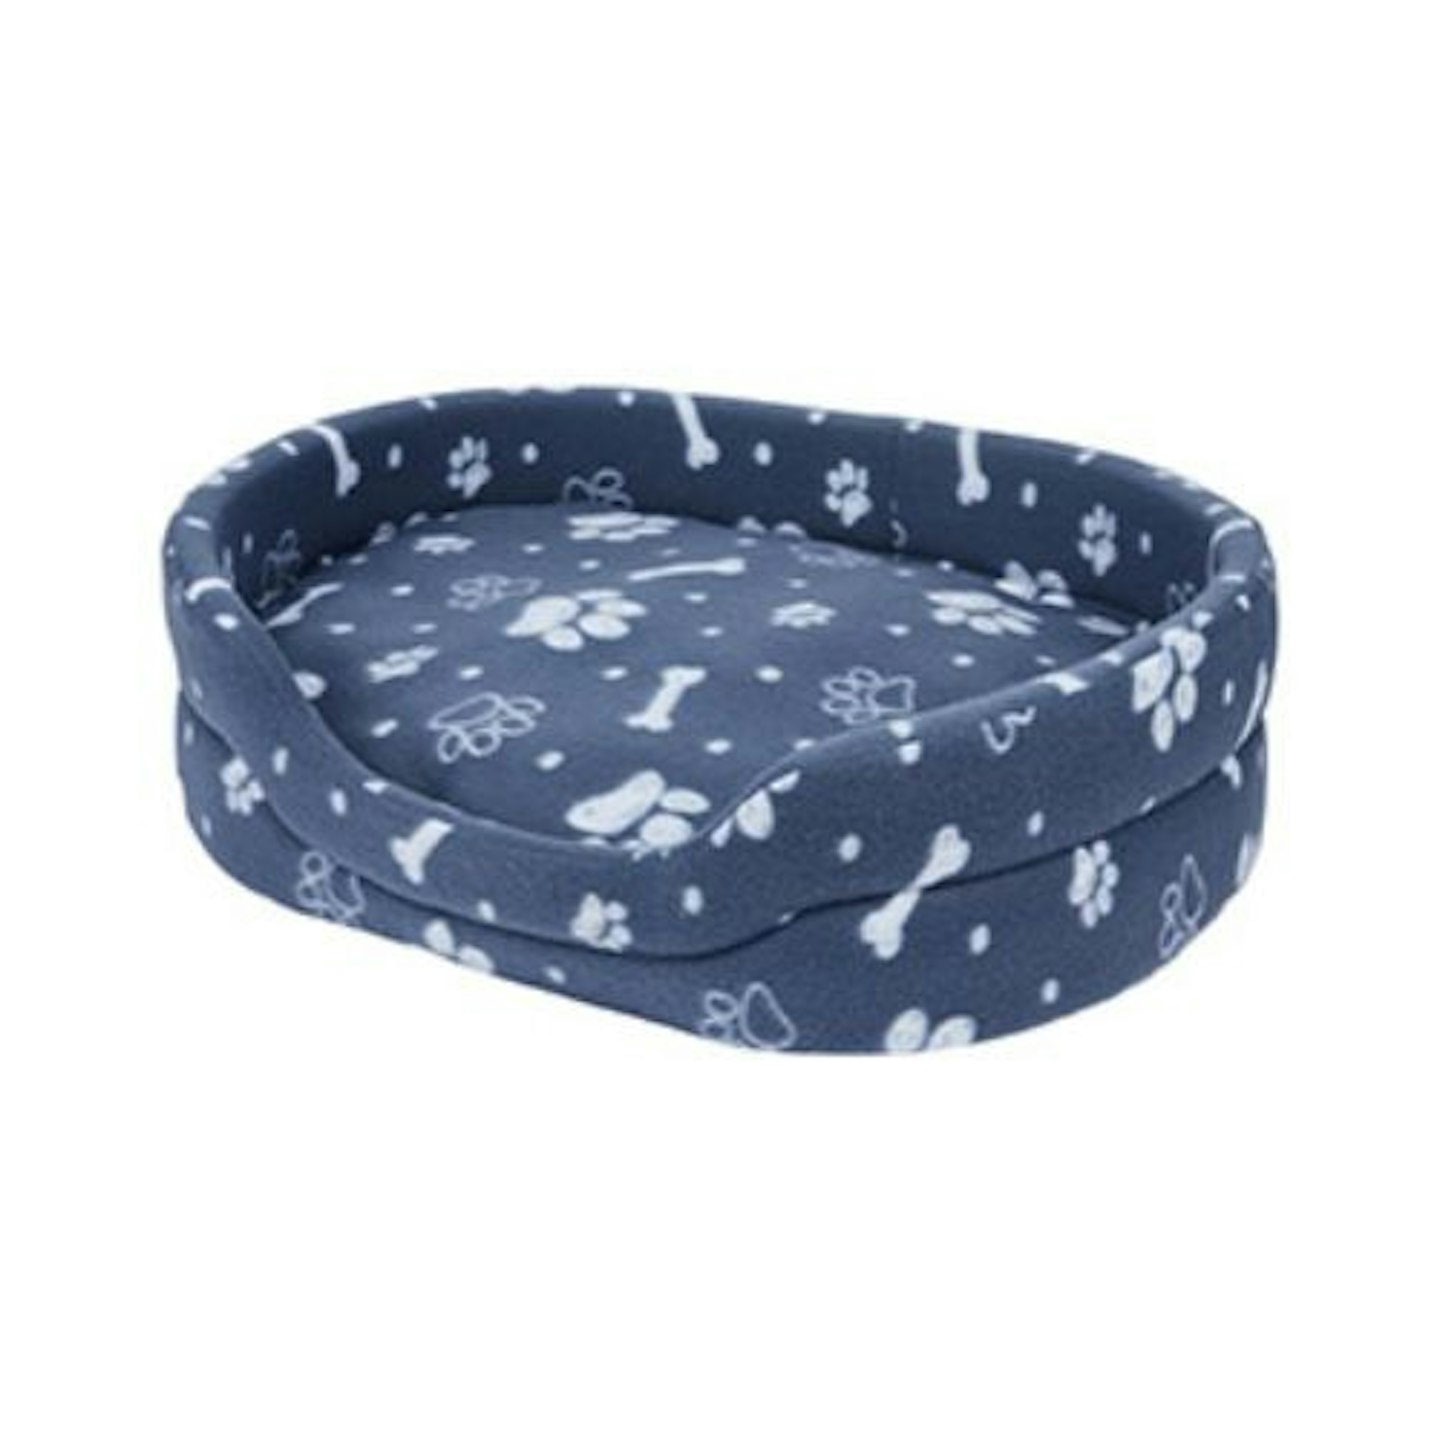 Pets at Home Bone Oval Dog Bed